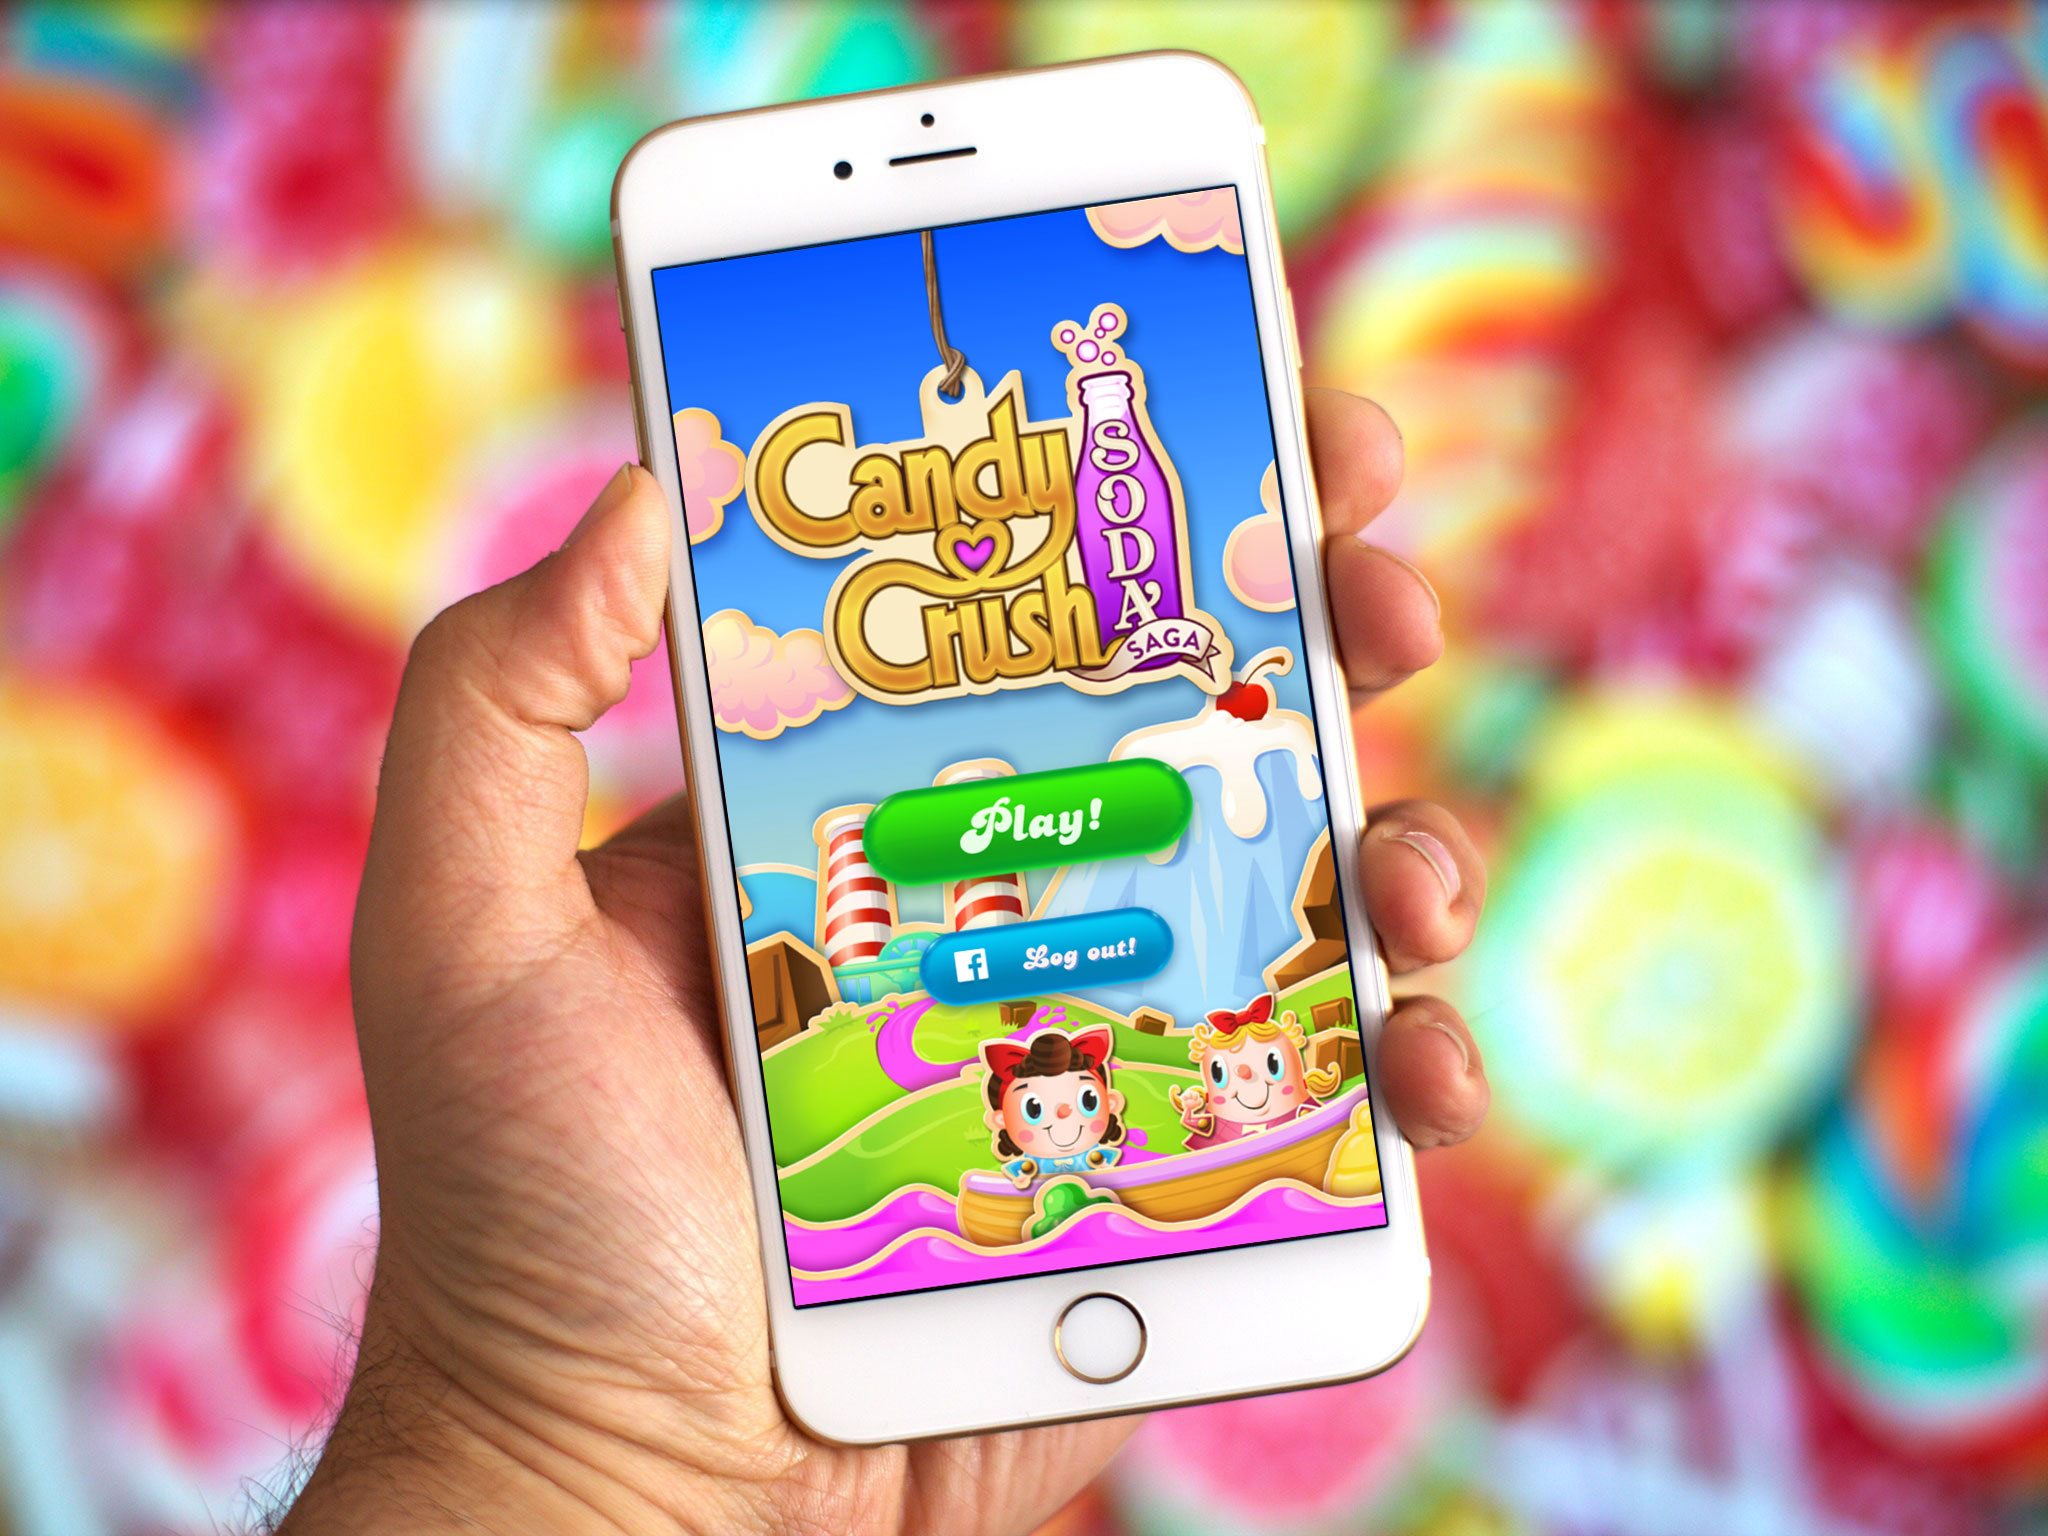 Candy Crush Soda Saga: Top 10 tips, hints, and cheats you need to know! | iMore